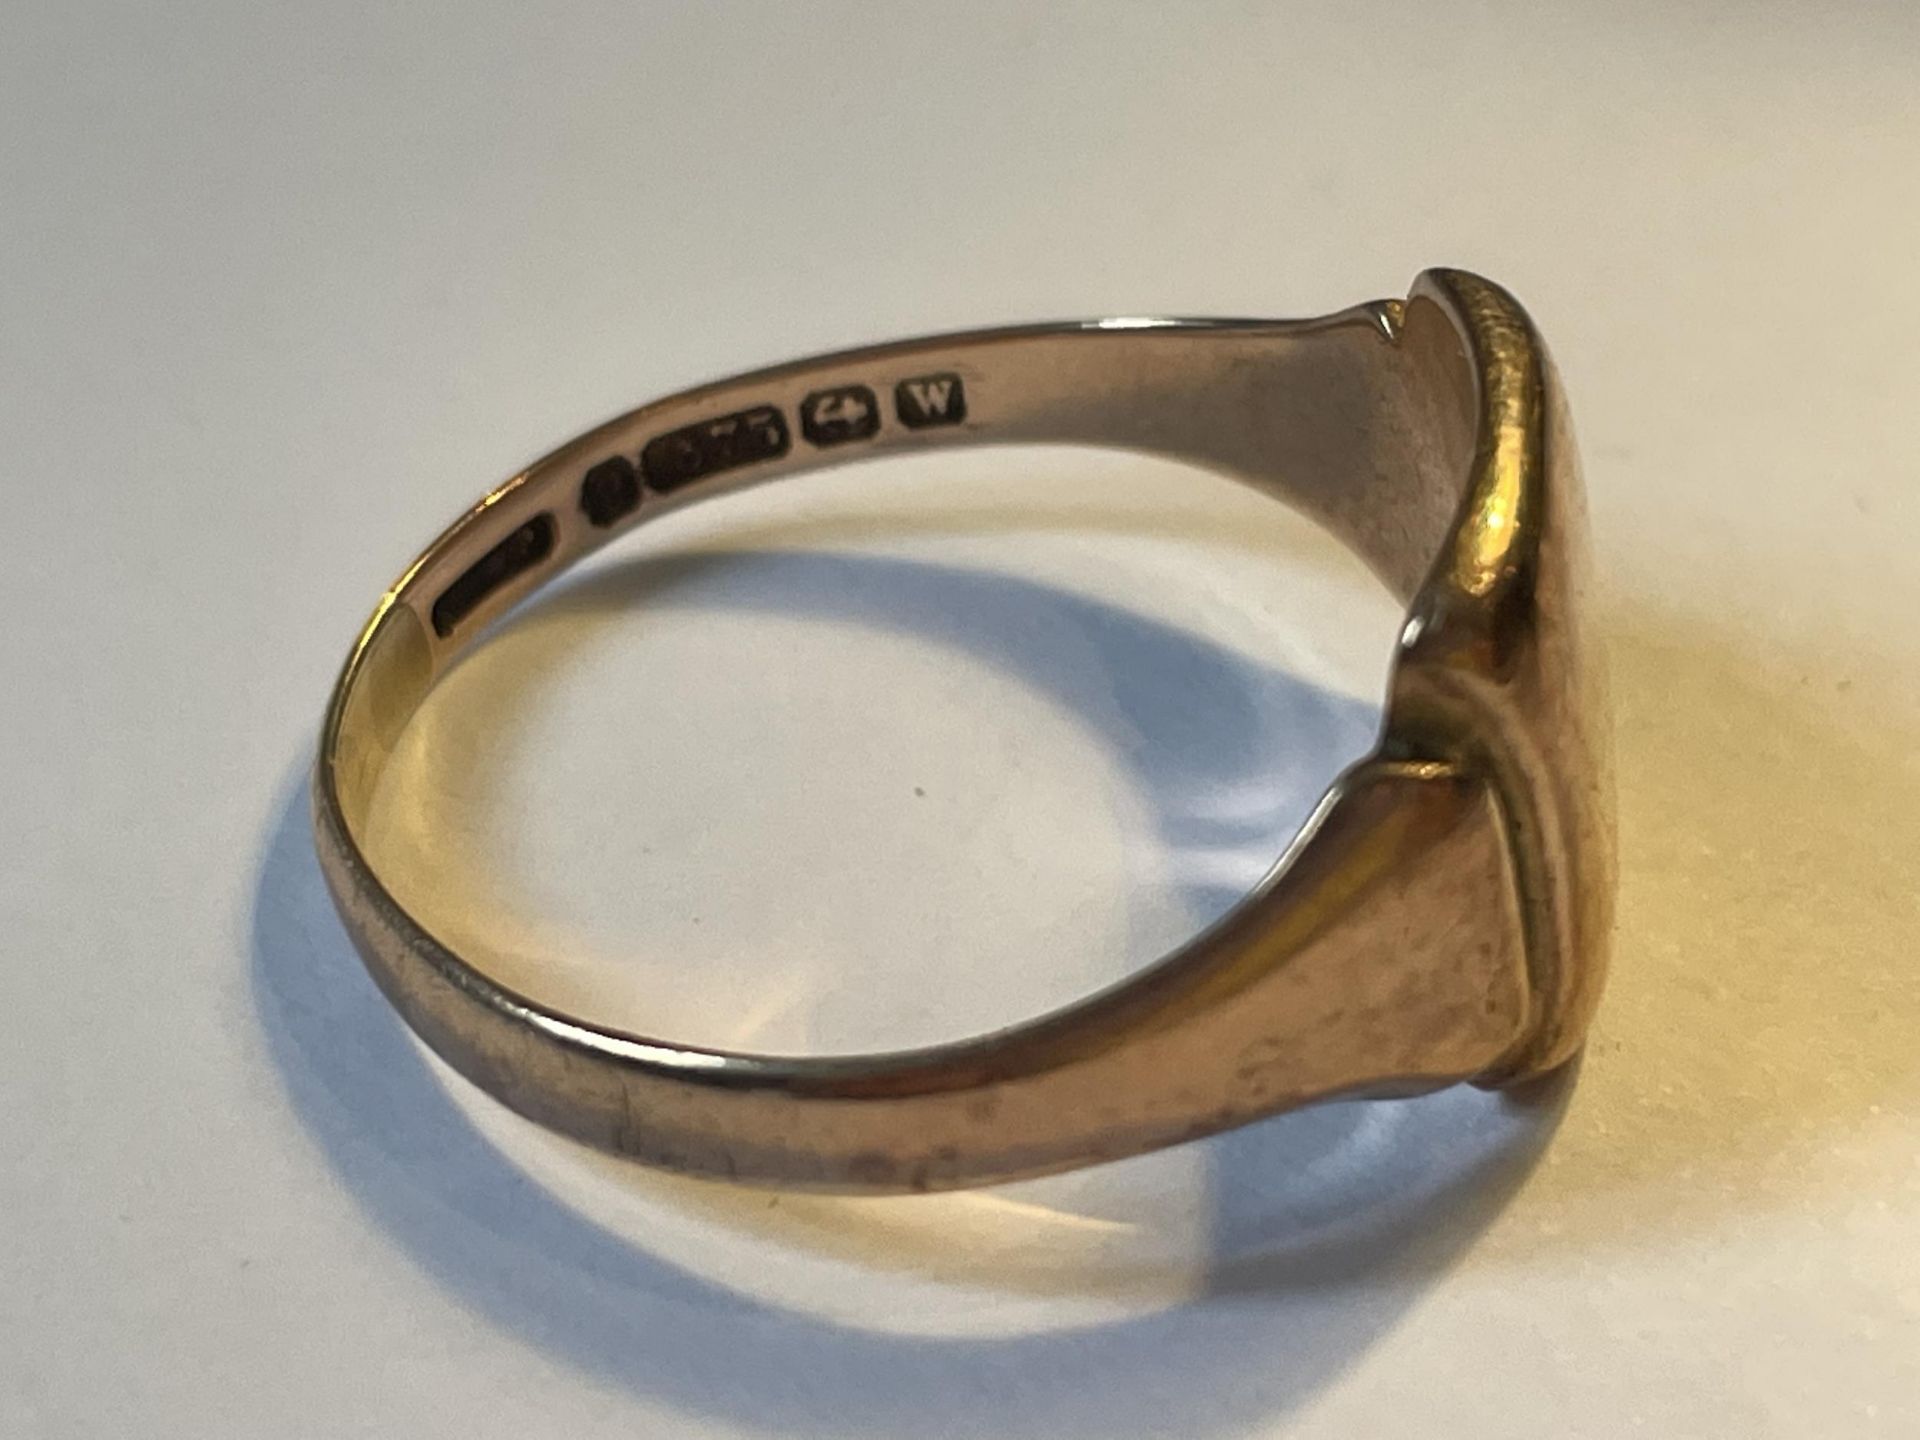 A 9 CARAT GOLD SIGNET RING MARKED 375 SIZE W GROSS WEIGHT 4.92 GRAMS - Image 2 of 3